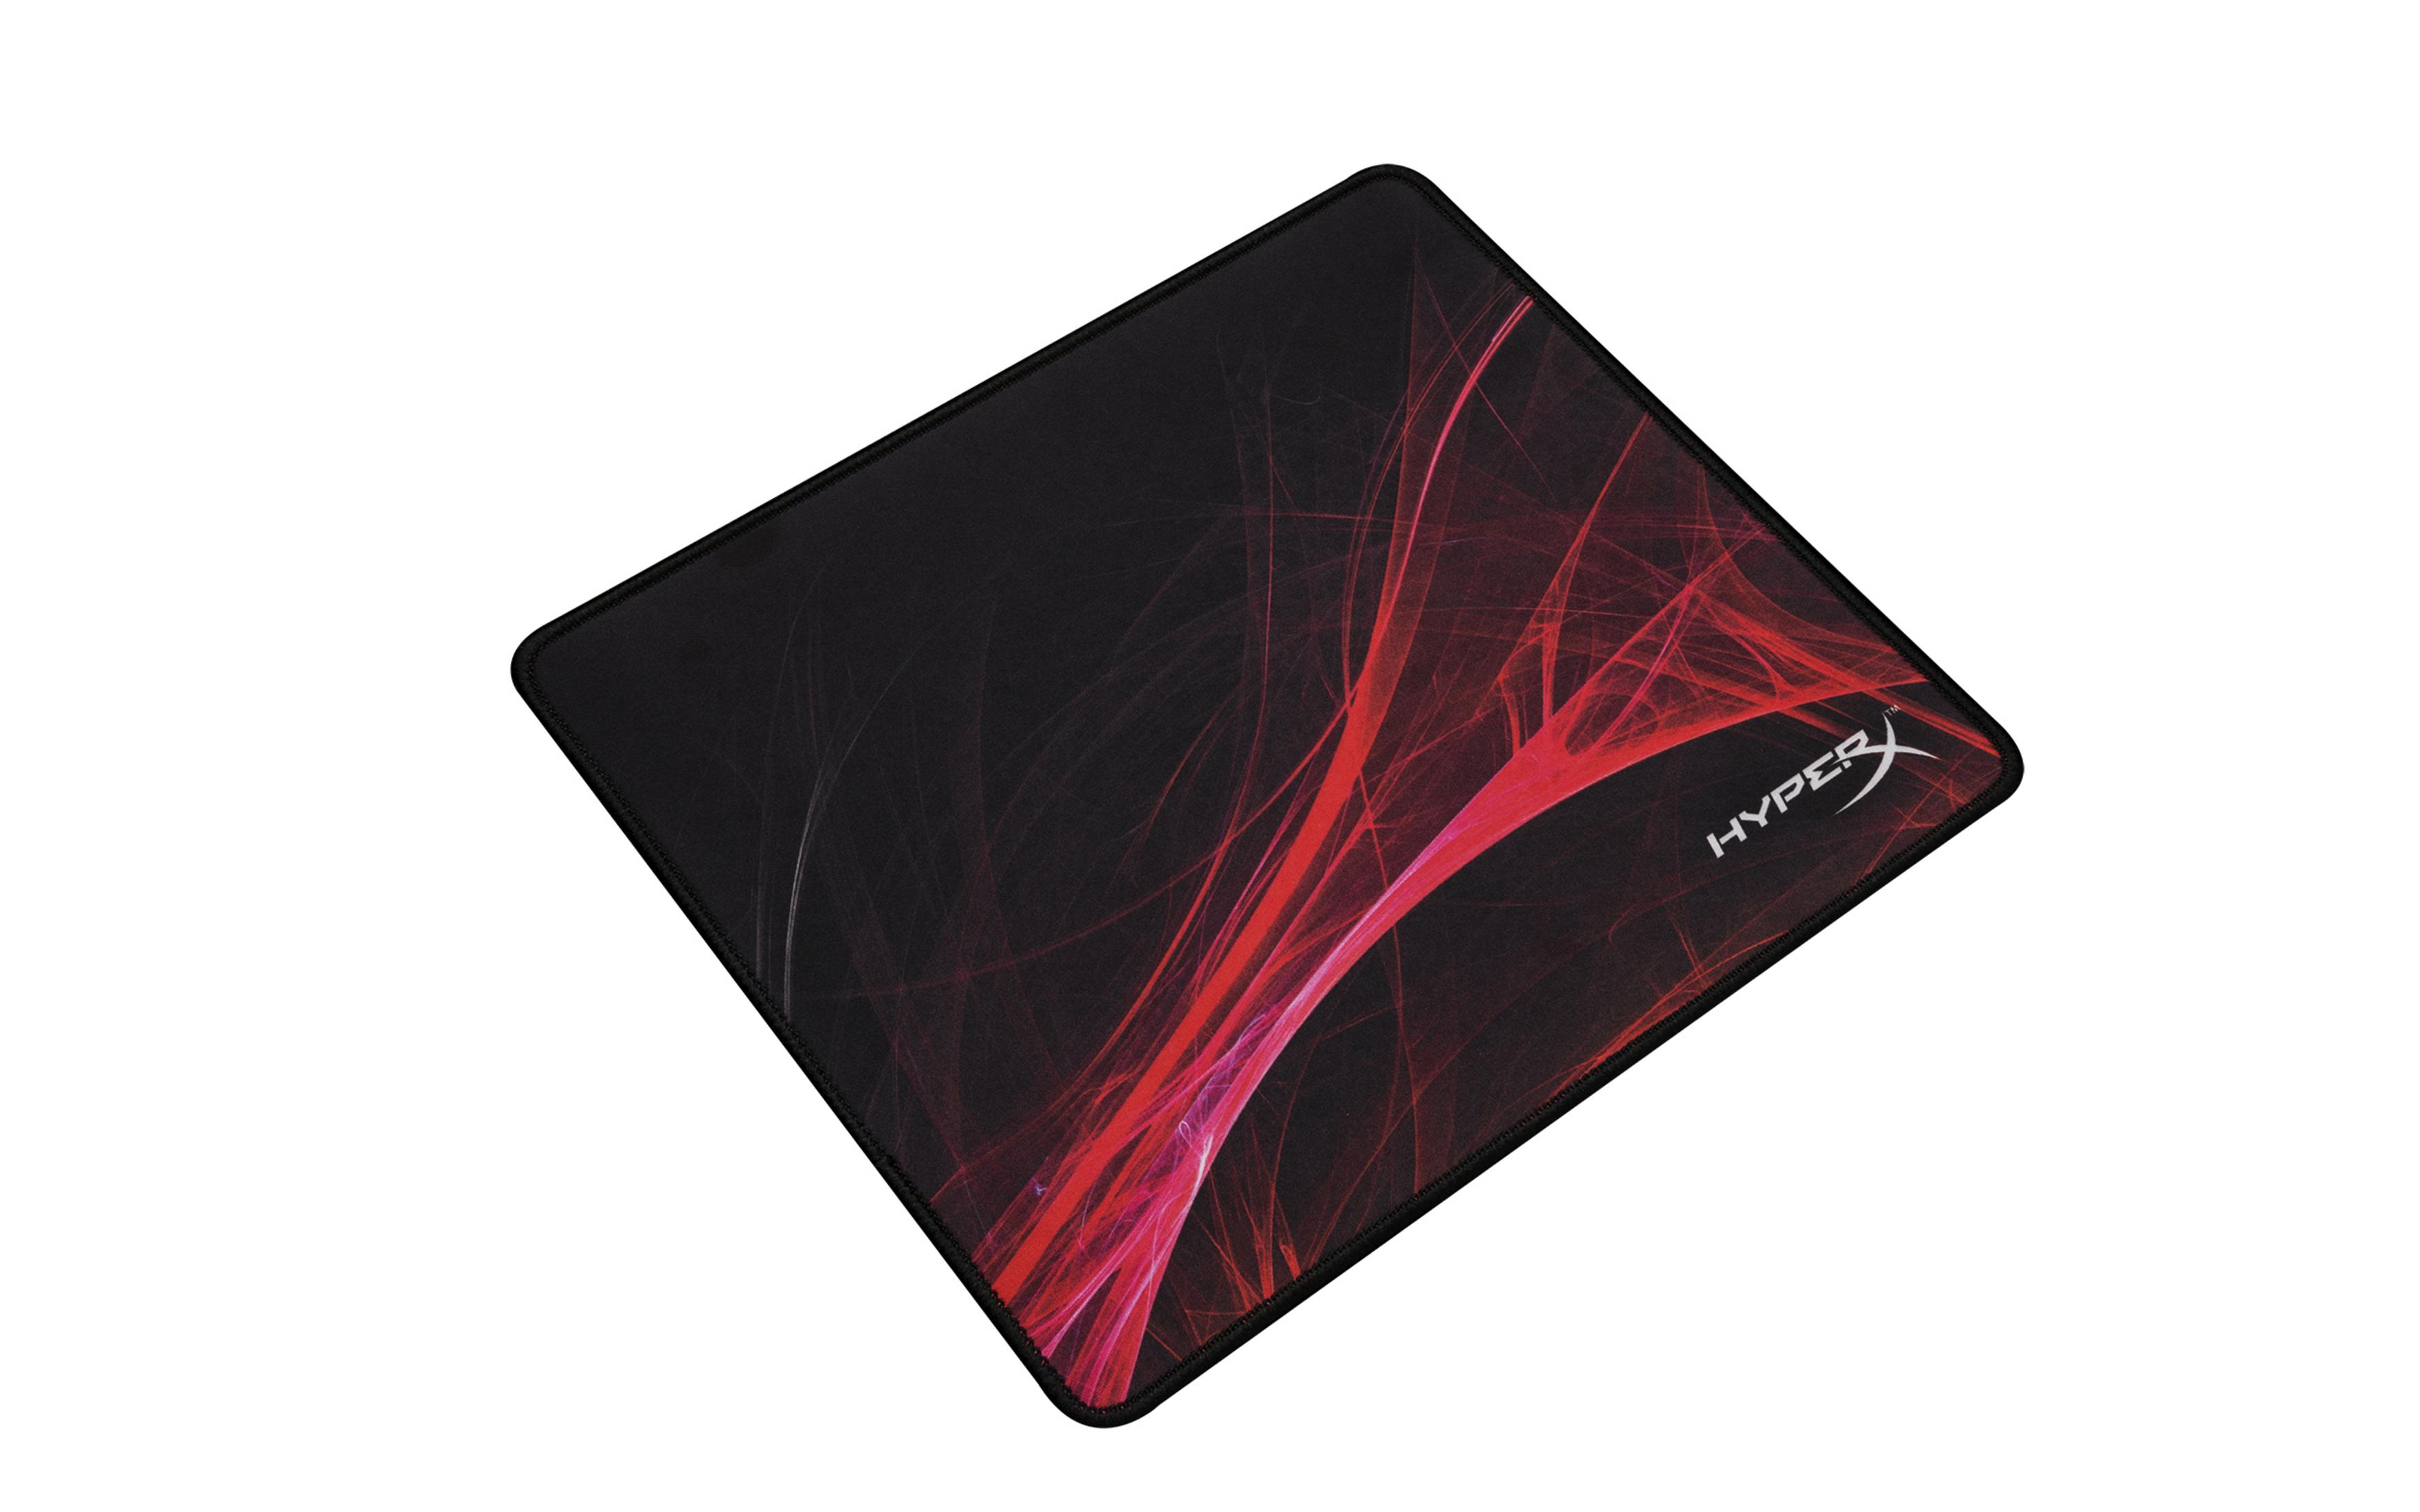 GAMING SPEED mm 4P5Q7AA 240 FURY PAD mm) x S EDITION MOUSE PRO (290 HYPERX Mauspad